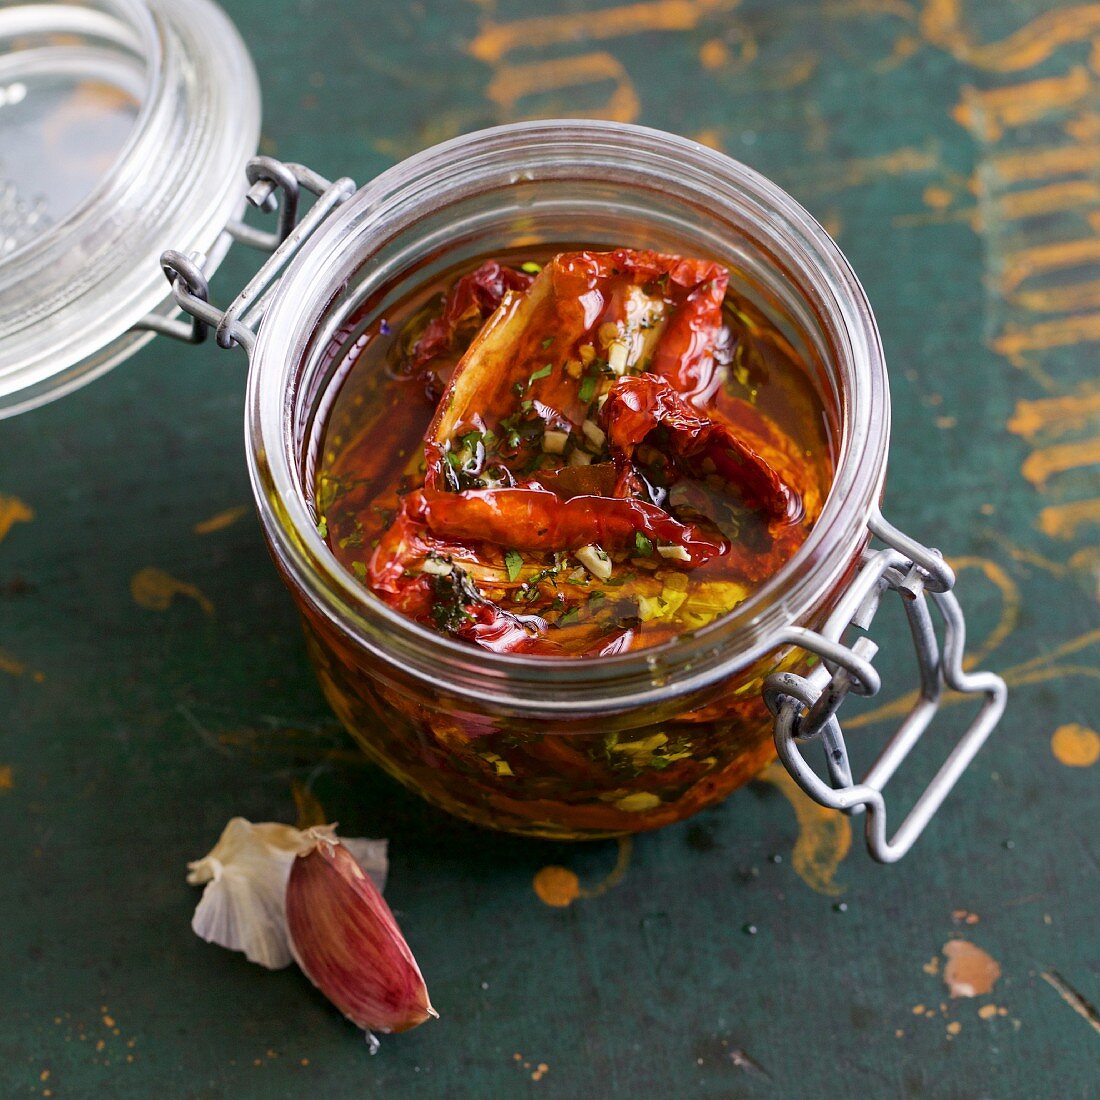 Home-dried tomatoes preserved with herbs in olive oil